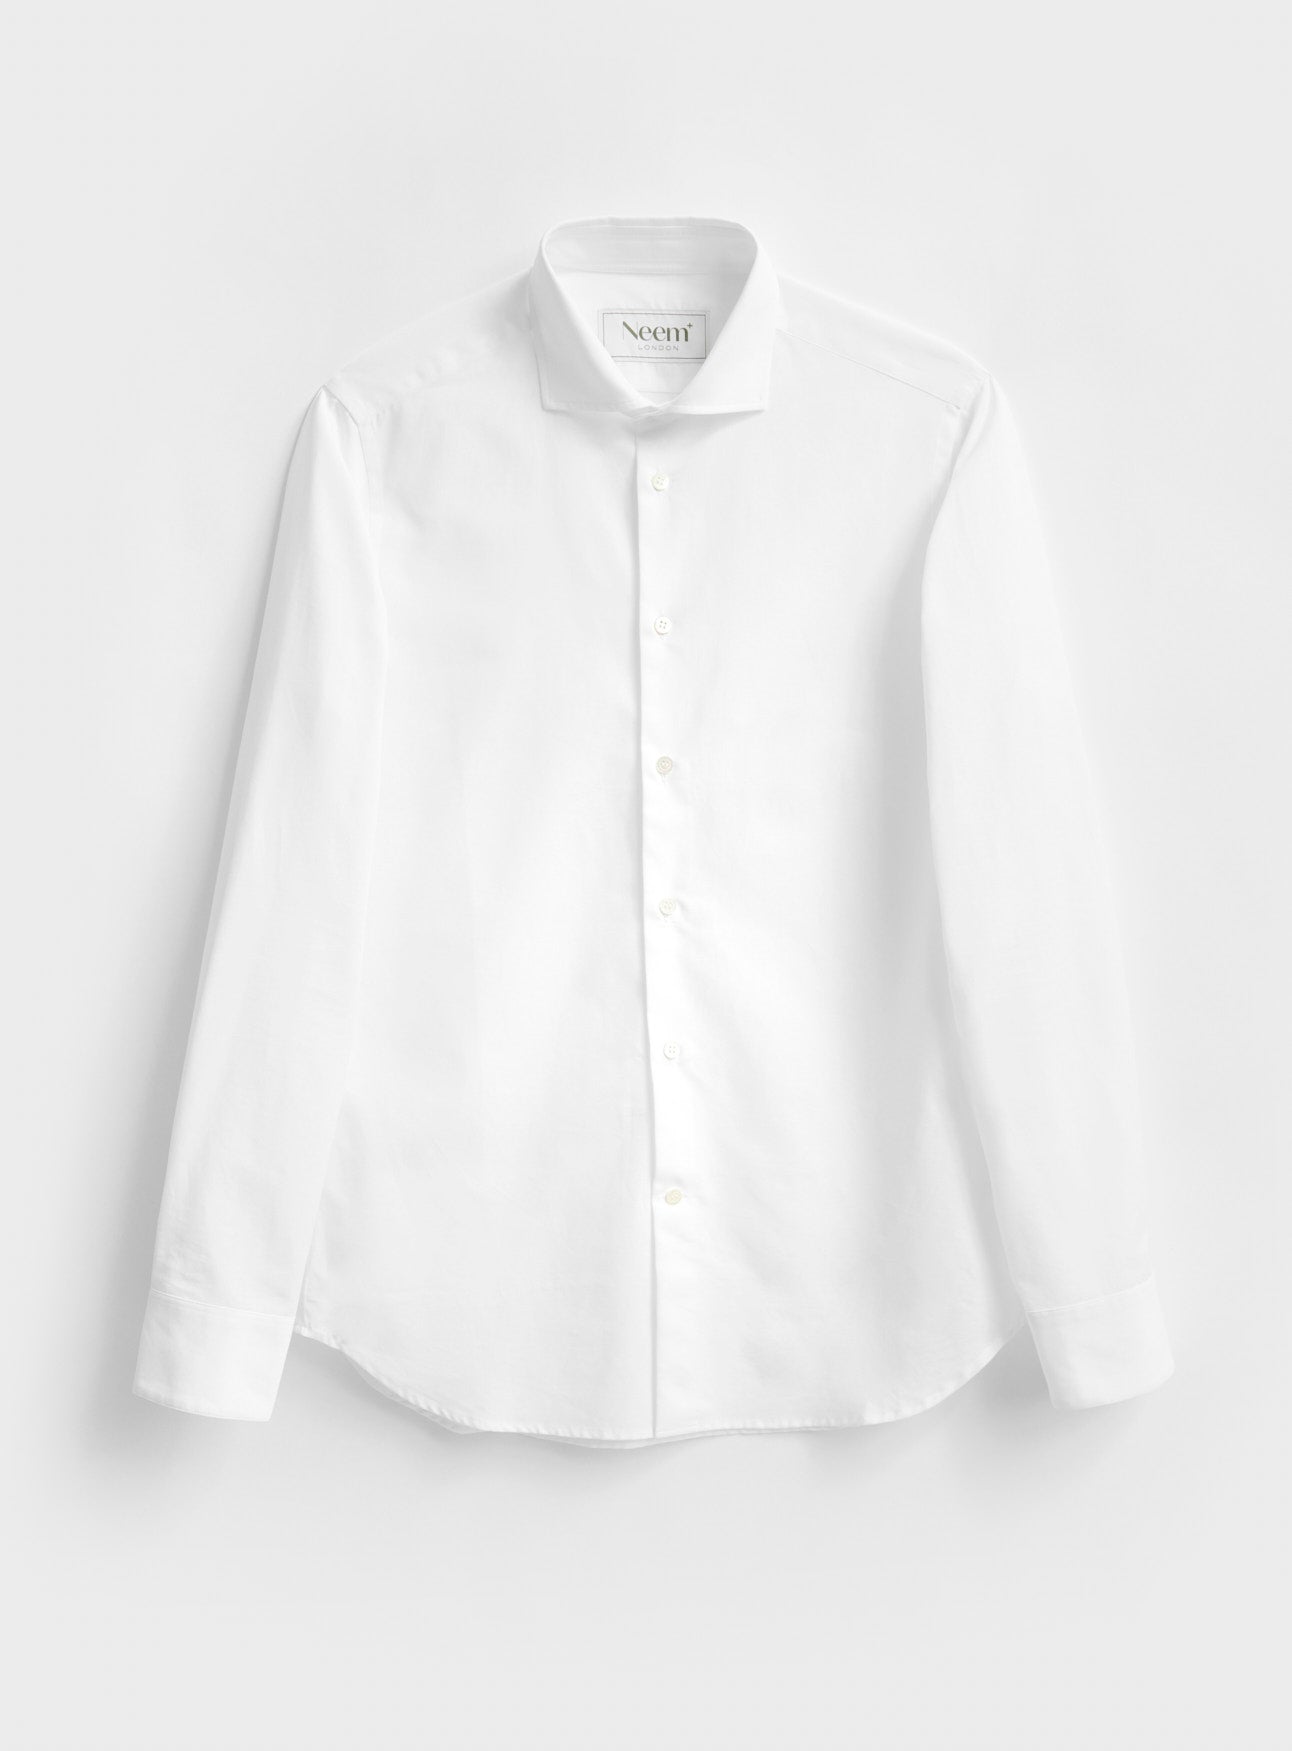 mens office wear, recycled cotton